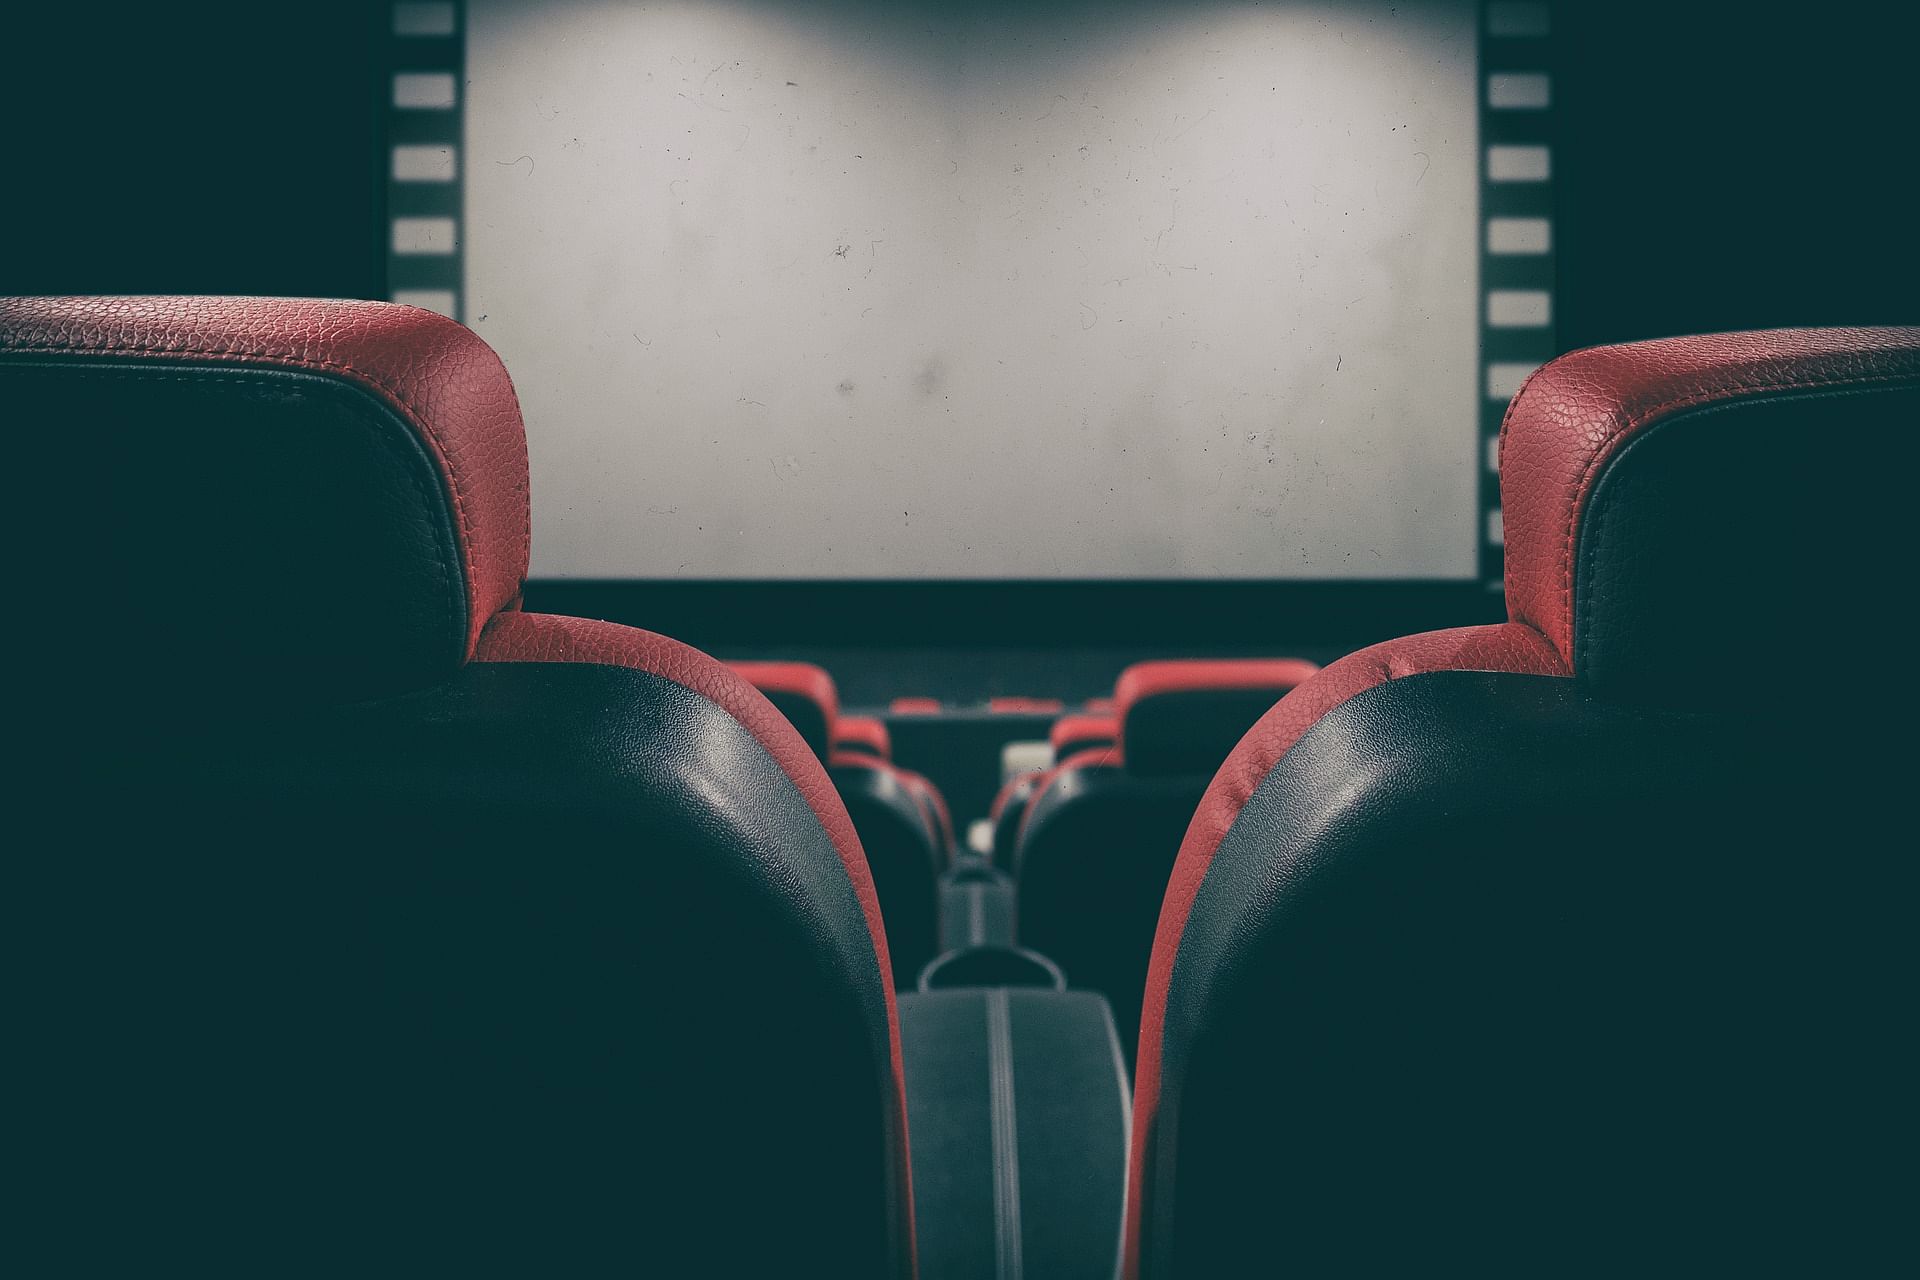 Sumitra S, a Chennai native, went with her friends to watch the movie 'Asuran' at Orion Mall.   When the national anthem played, Sumitra could not stand up since she had cramps. A group that sat before her picked a quarrel during the interval, abusing and threatening Sumitra and her friend. Representation image/Pixabay